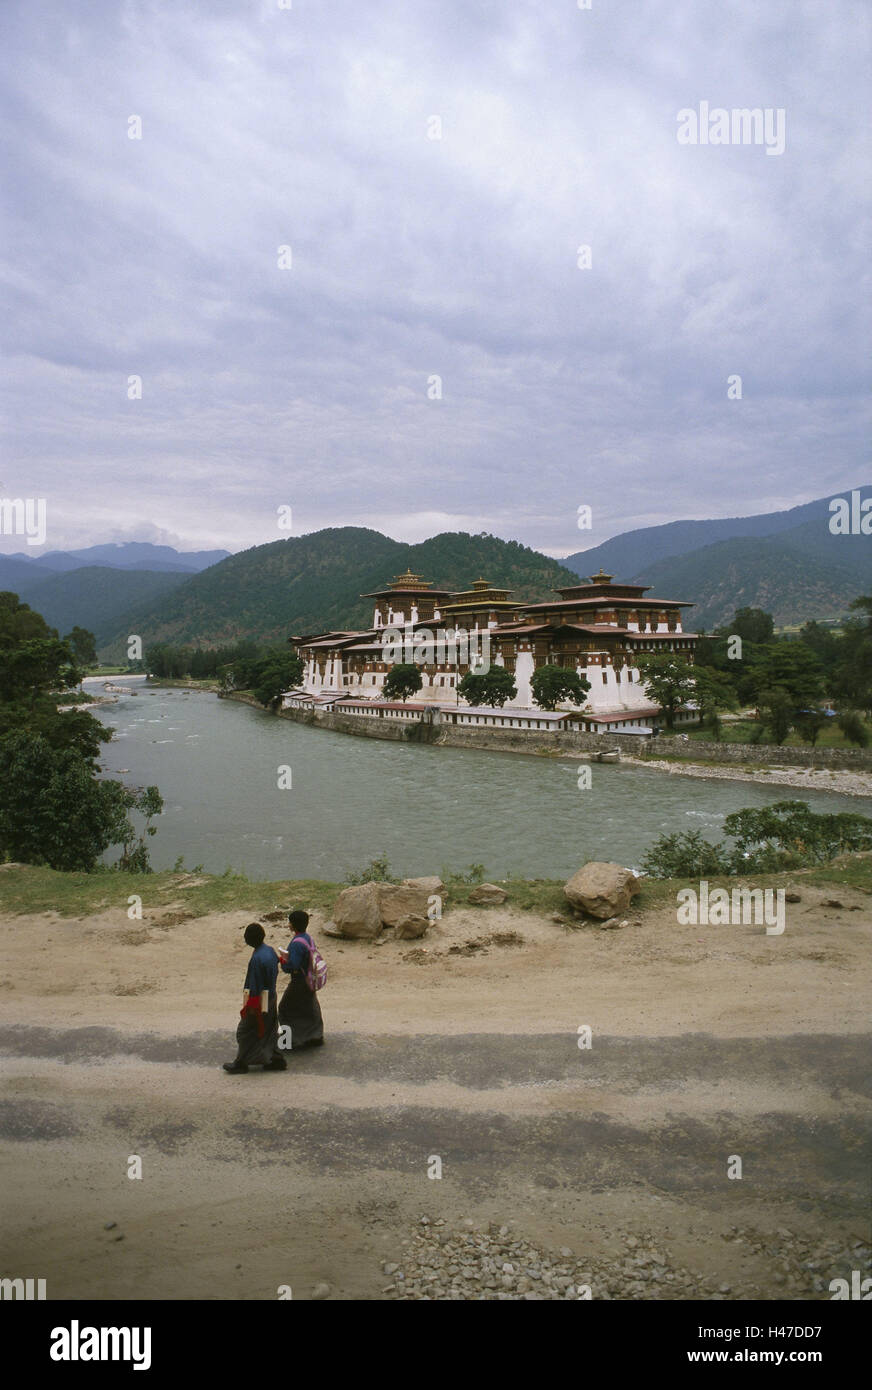 Bhutan, Punakha, cloister fortress Dzong, river, street, passer-by, scenery, Asia, the Himalayas, kingdom, Zentralbhutan, culture, Punakha-Dzong, cloister, cloister facility, cloister castle, fortress, structure, building, historically, architecture, reli Stock Photo